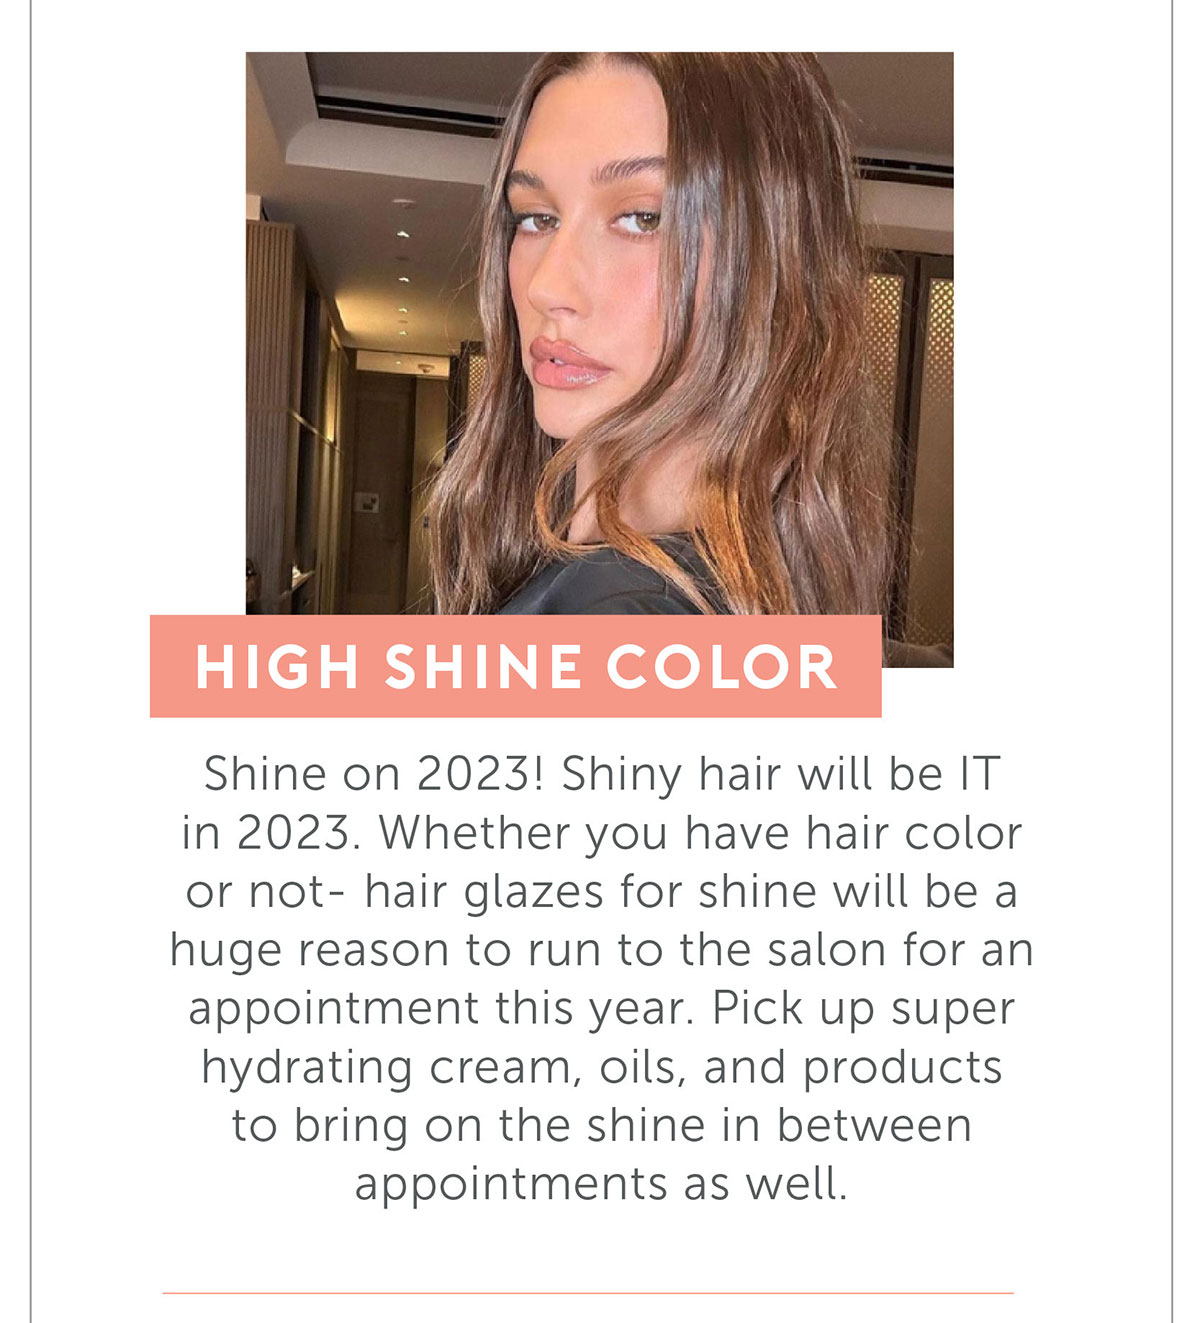 HIGH Shine Color. Shine on 2023! Shiny hair will be IT in 2023. Whether you have hair color or not- hair glazes for shine will be a huge reason to run to the salon for an appointment this year. Pick up super hydrating cream, oils, and products to bring on the shine in between appointments as well.